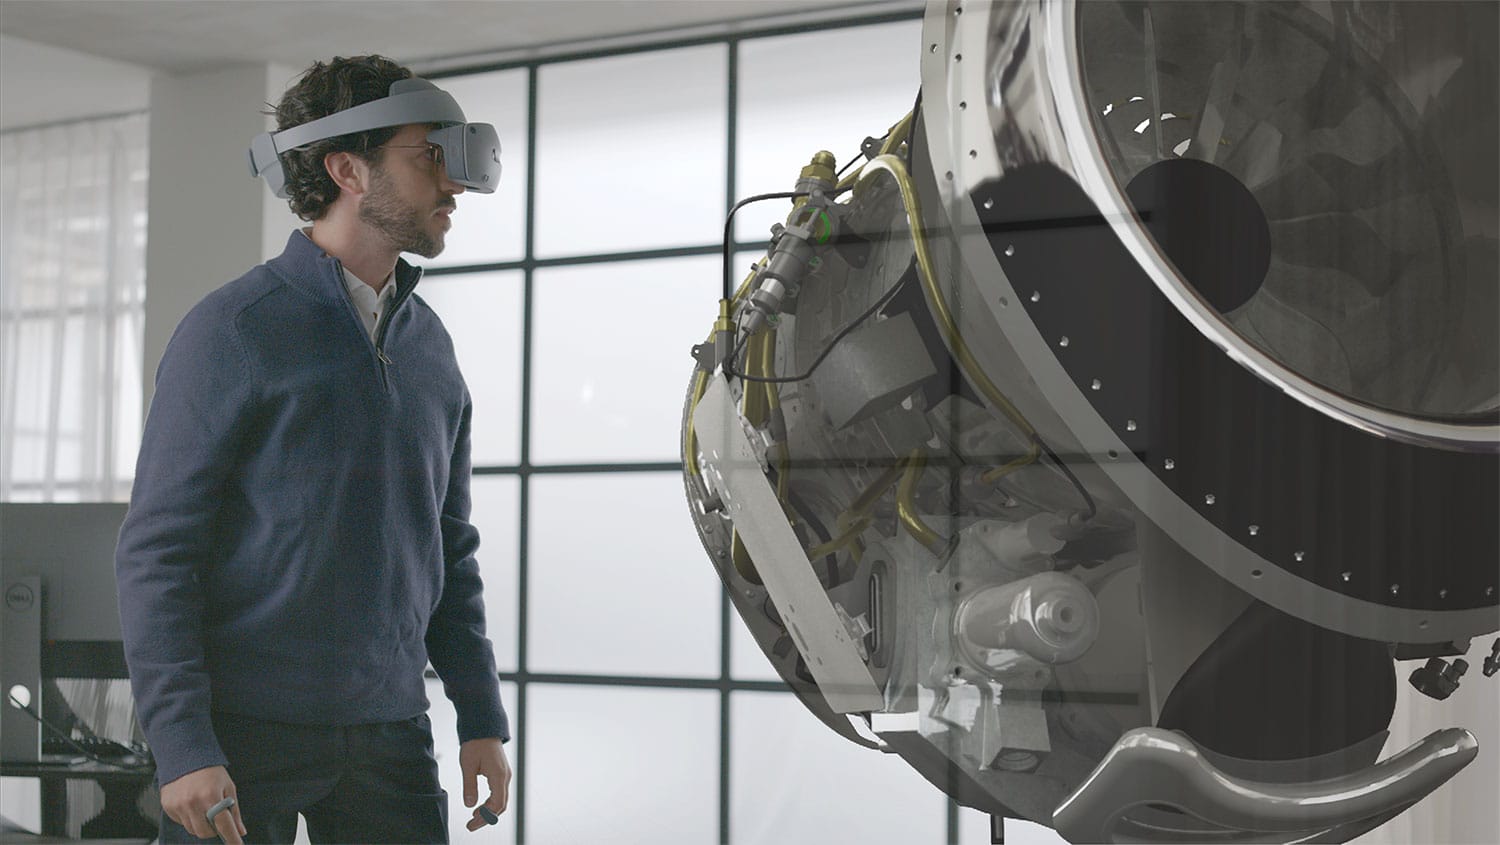 Siemens and Sony partnership to enable immersive engineering.